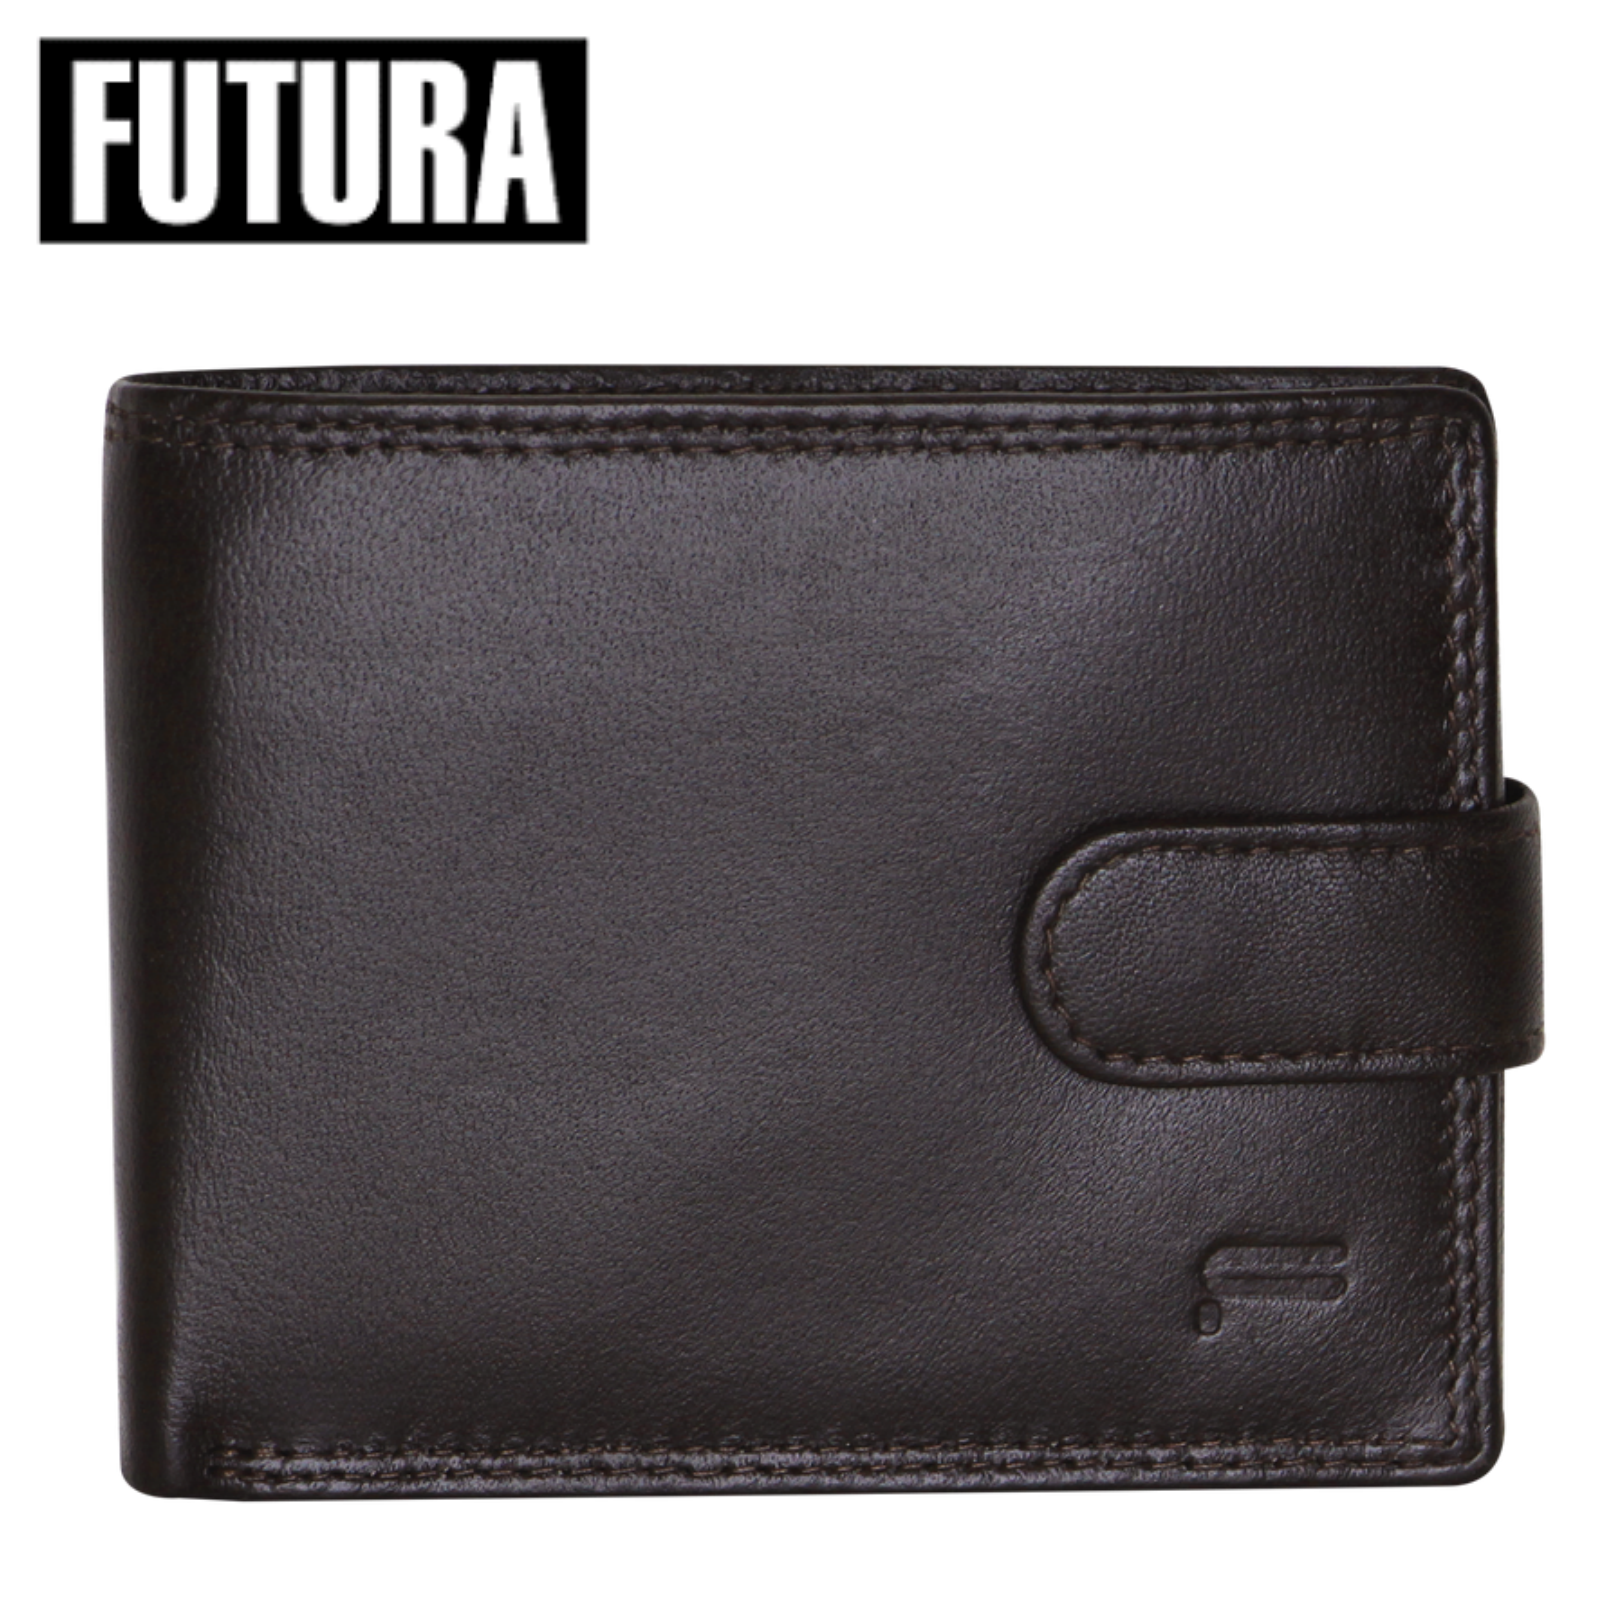 Futura Mens RFID Leather Coin Fold Over Wallet - Brown